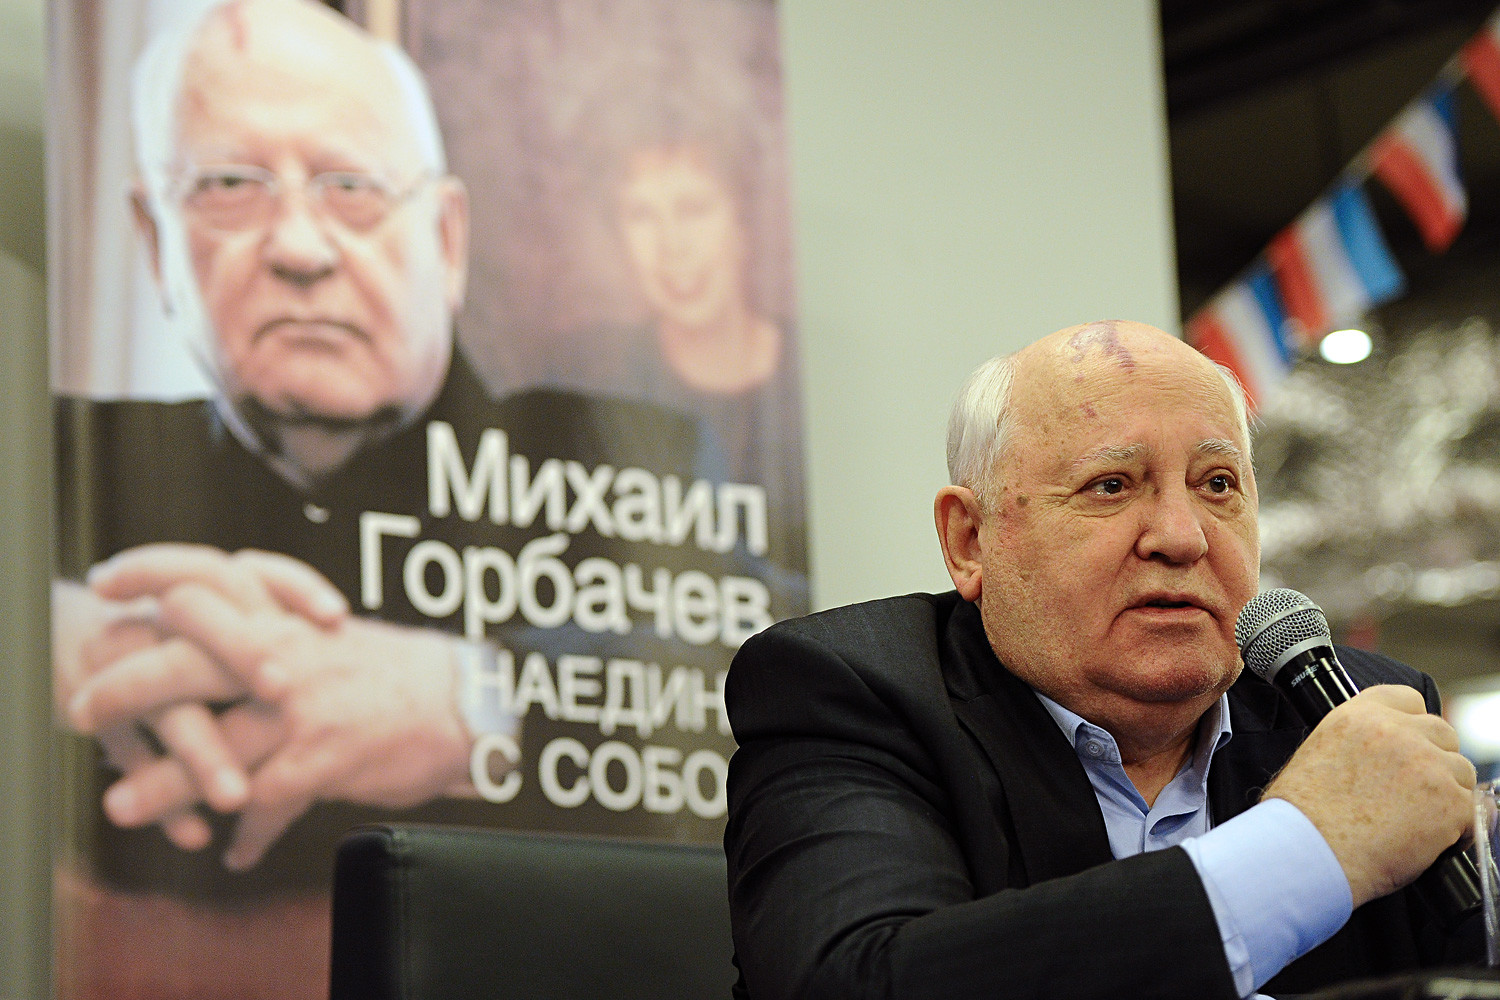 Mikhail Gorbachev during the presentation of his new book 